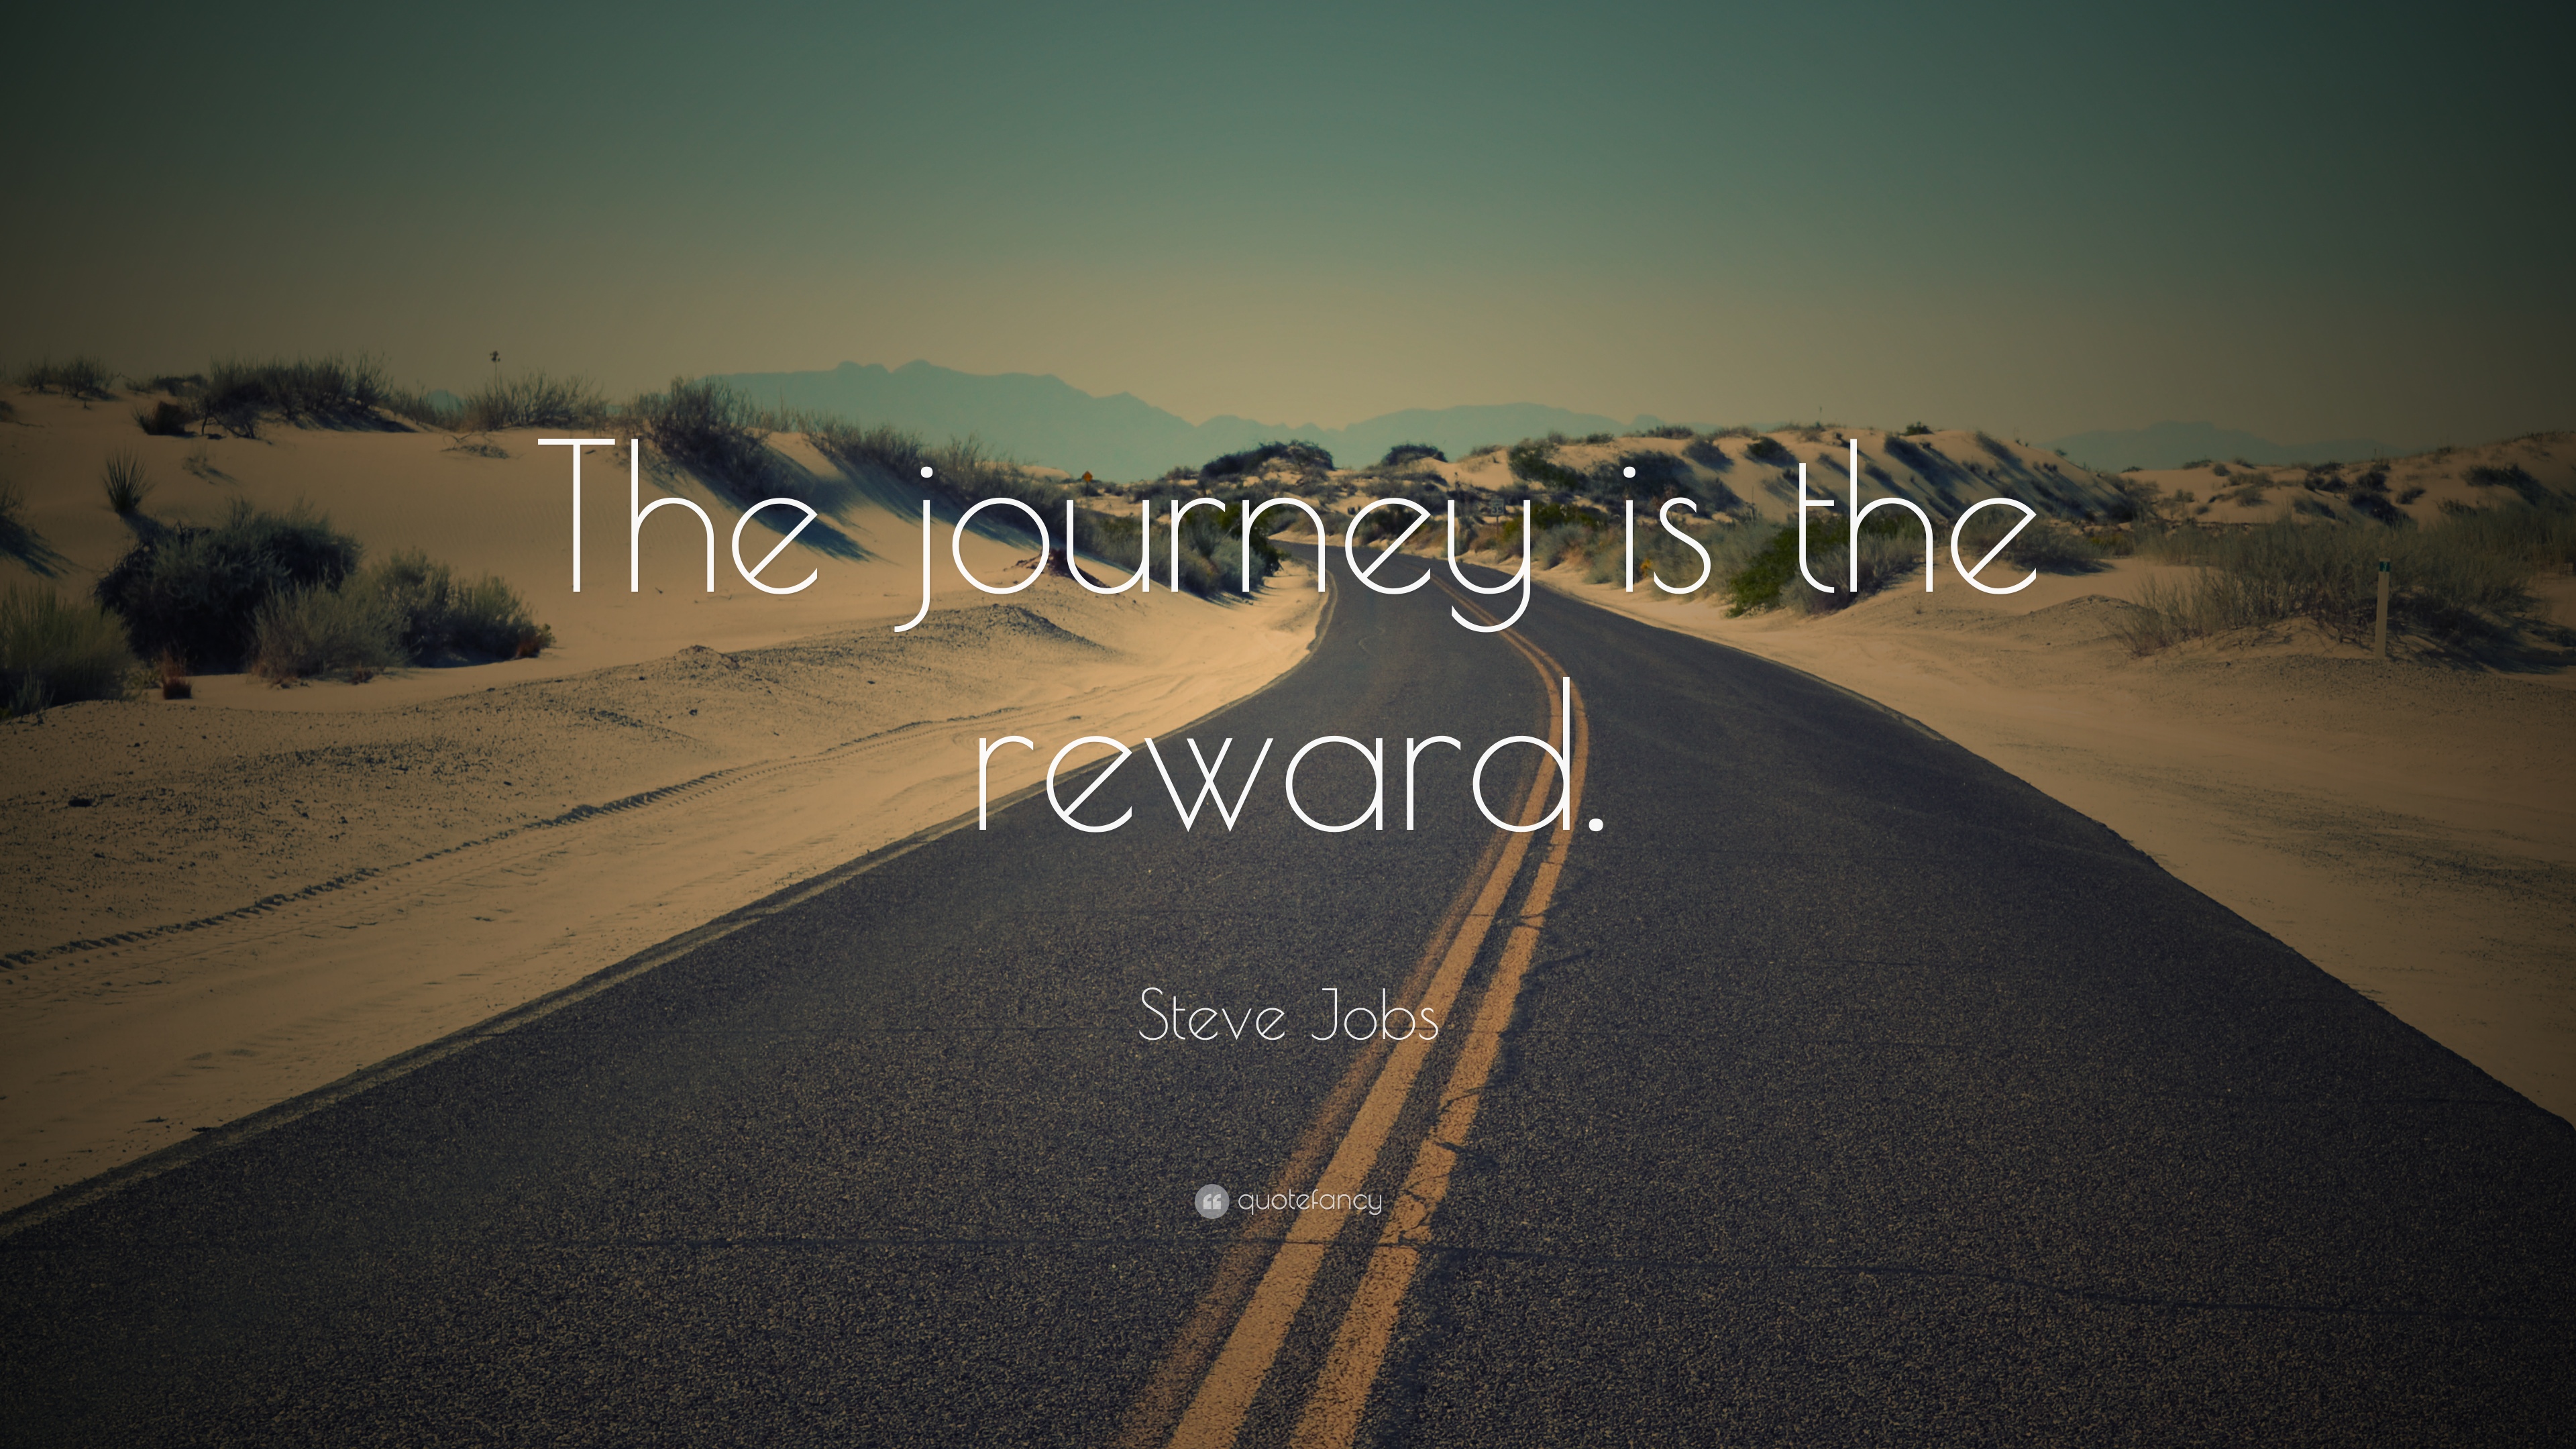 Steve Jobs Quote: “The journey is the reward.” (27 wallpapers ...